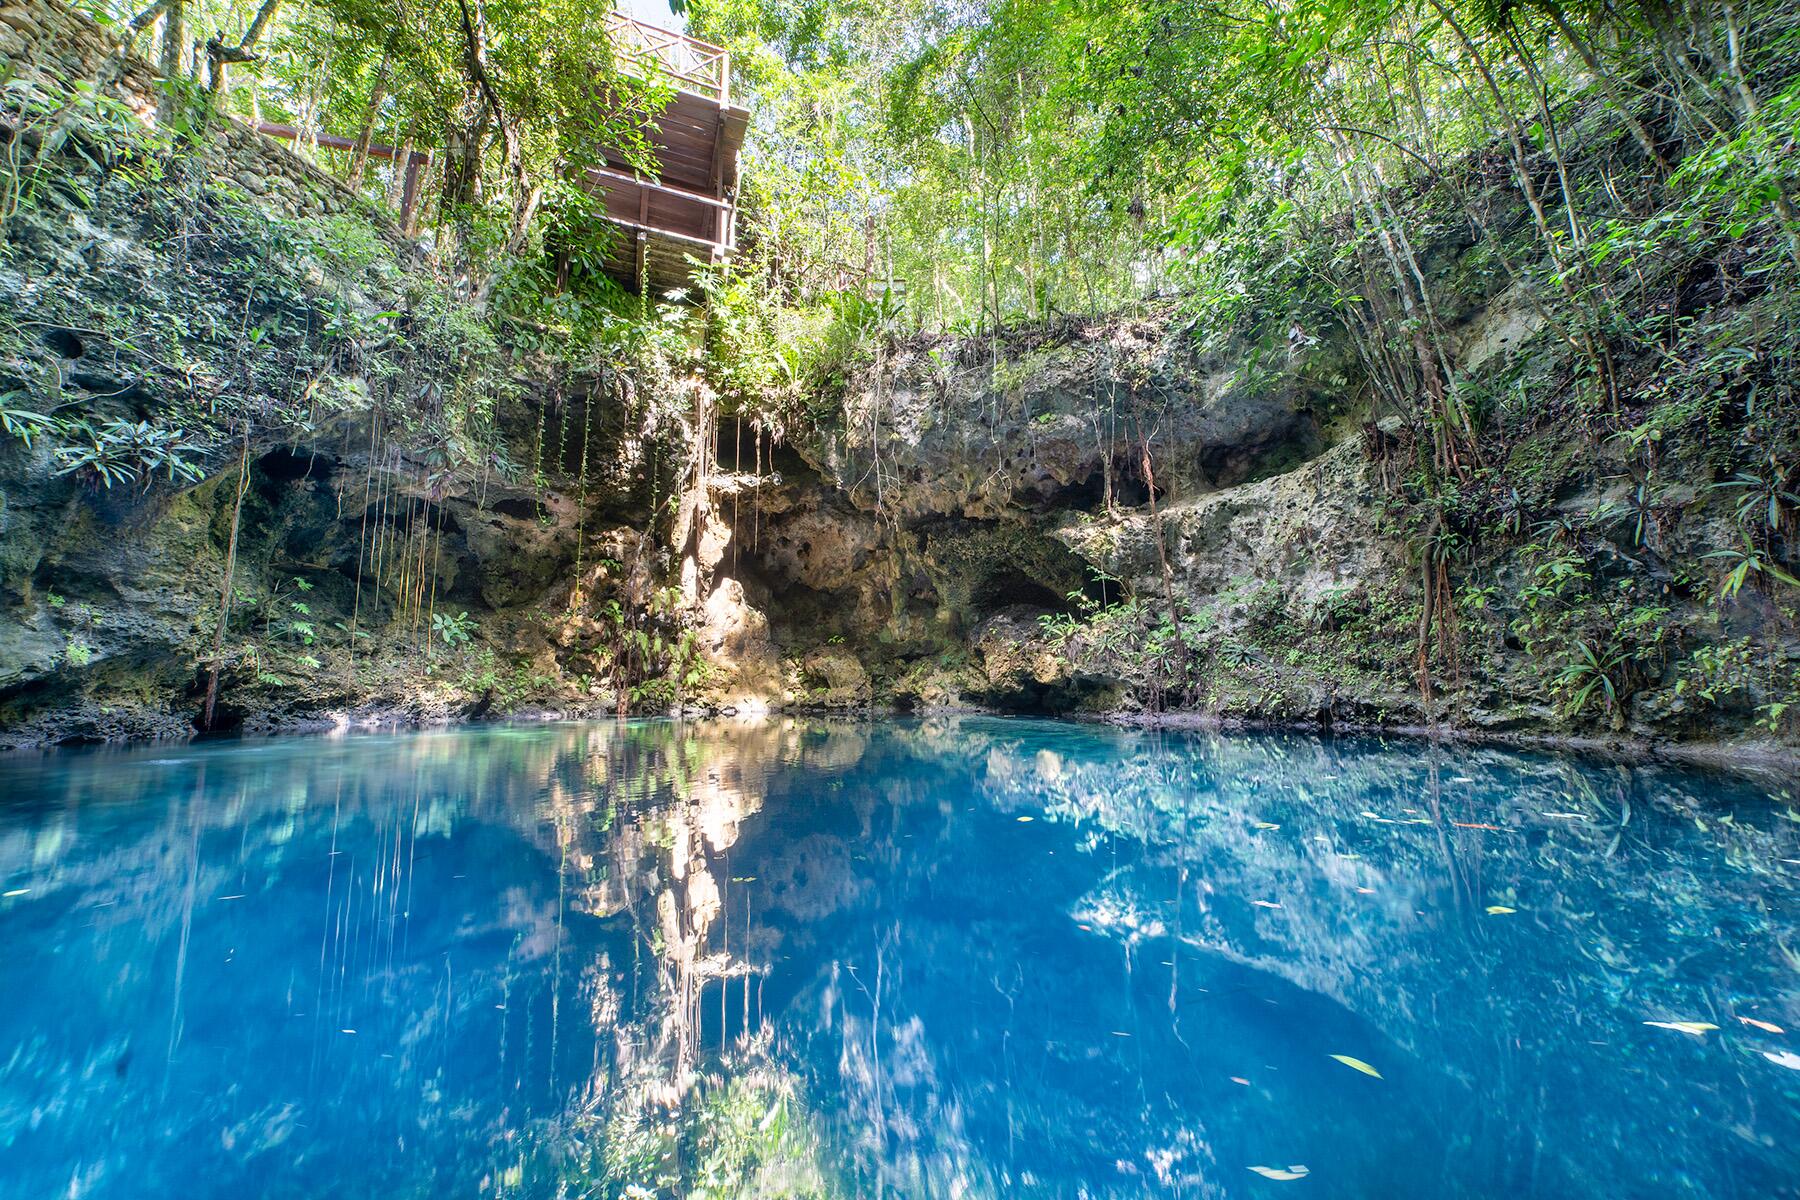 <a href='https://www.fodors.com/world/mexico-and-central-america/mexico/the-riviera-maya/experiences/news/photos/best-cenotes-to-visit-in-riviera-maya#'>From &quot;The 10 Most Magical Cenotes in the Riviera Maya: Cenote Zapote&quot;</a>